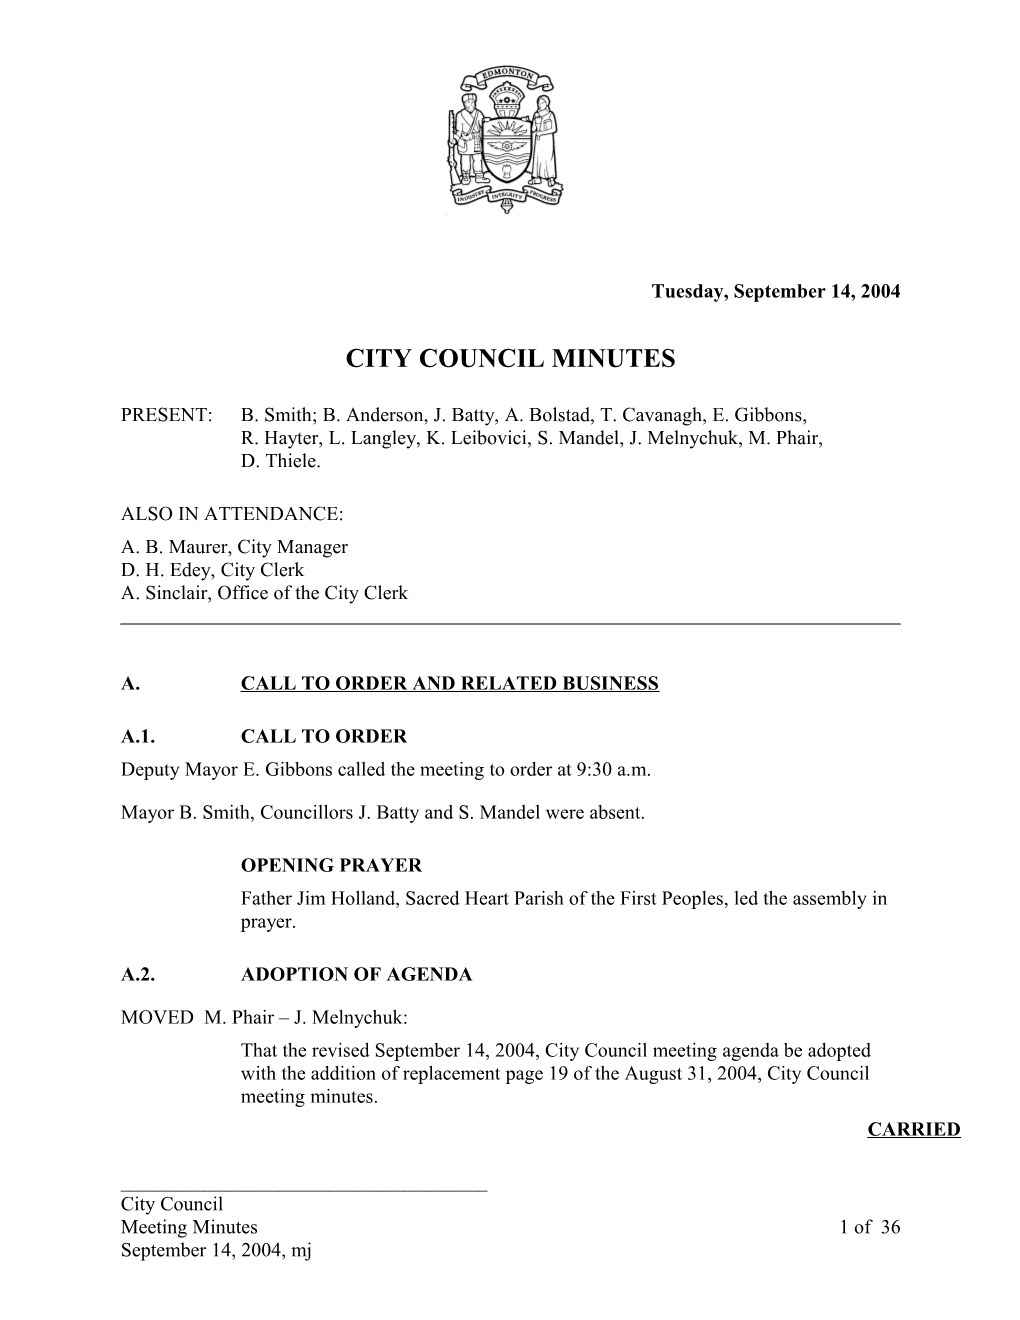 Minutes for City Council September 14, 2004 Meeting